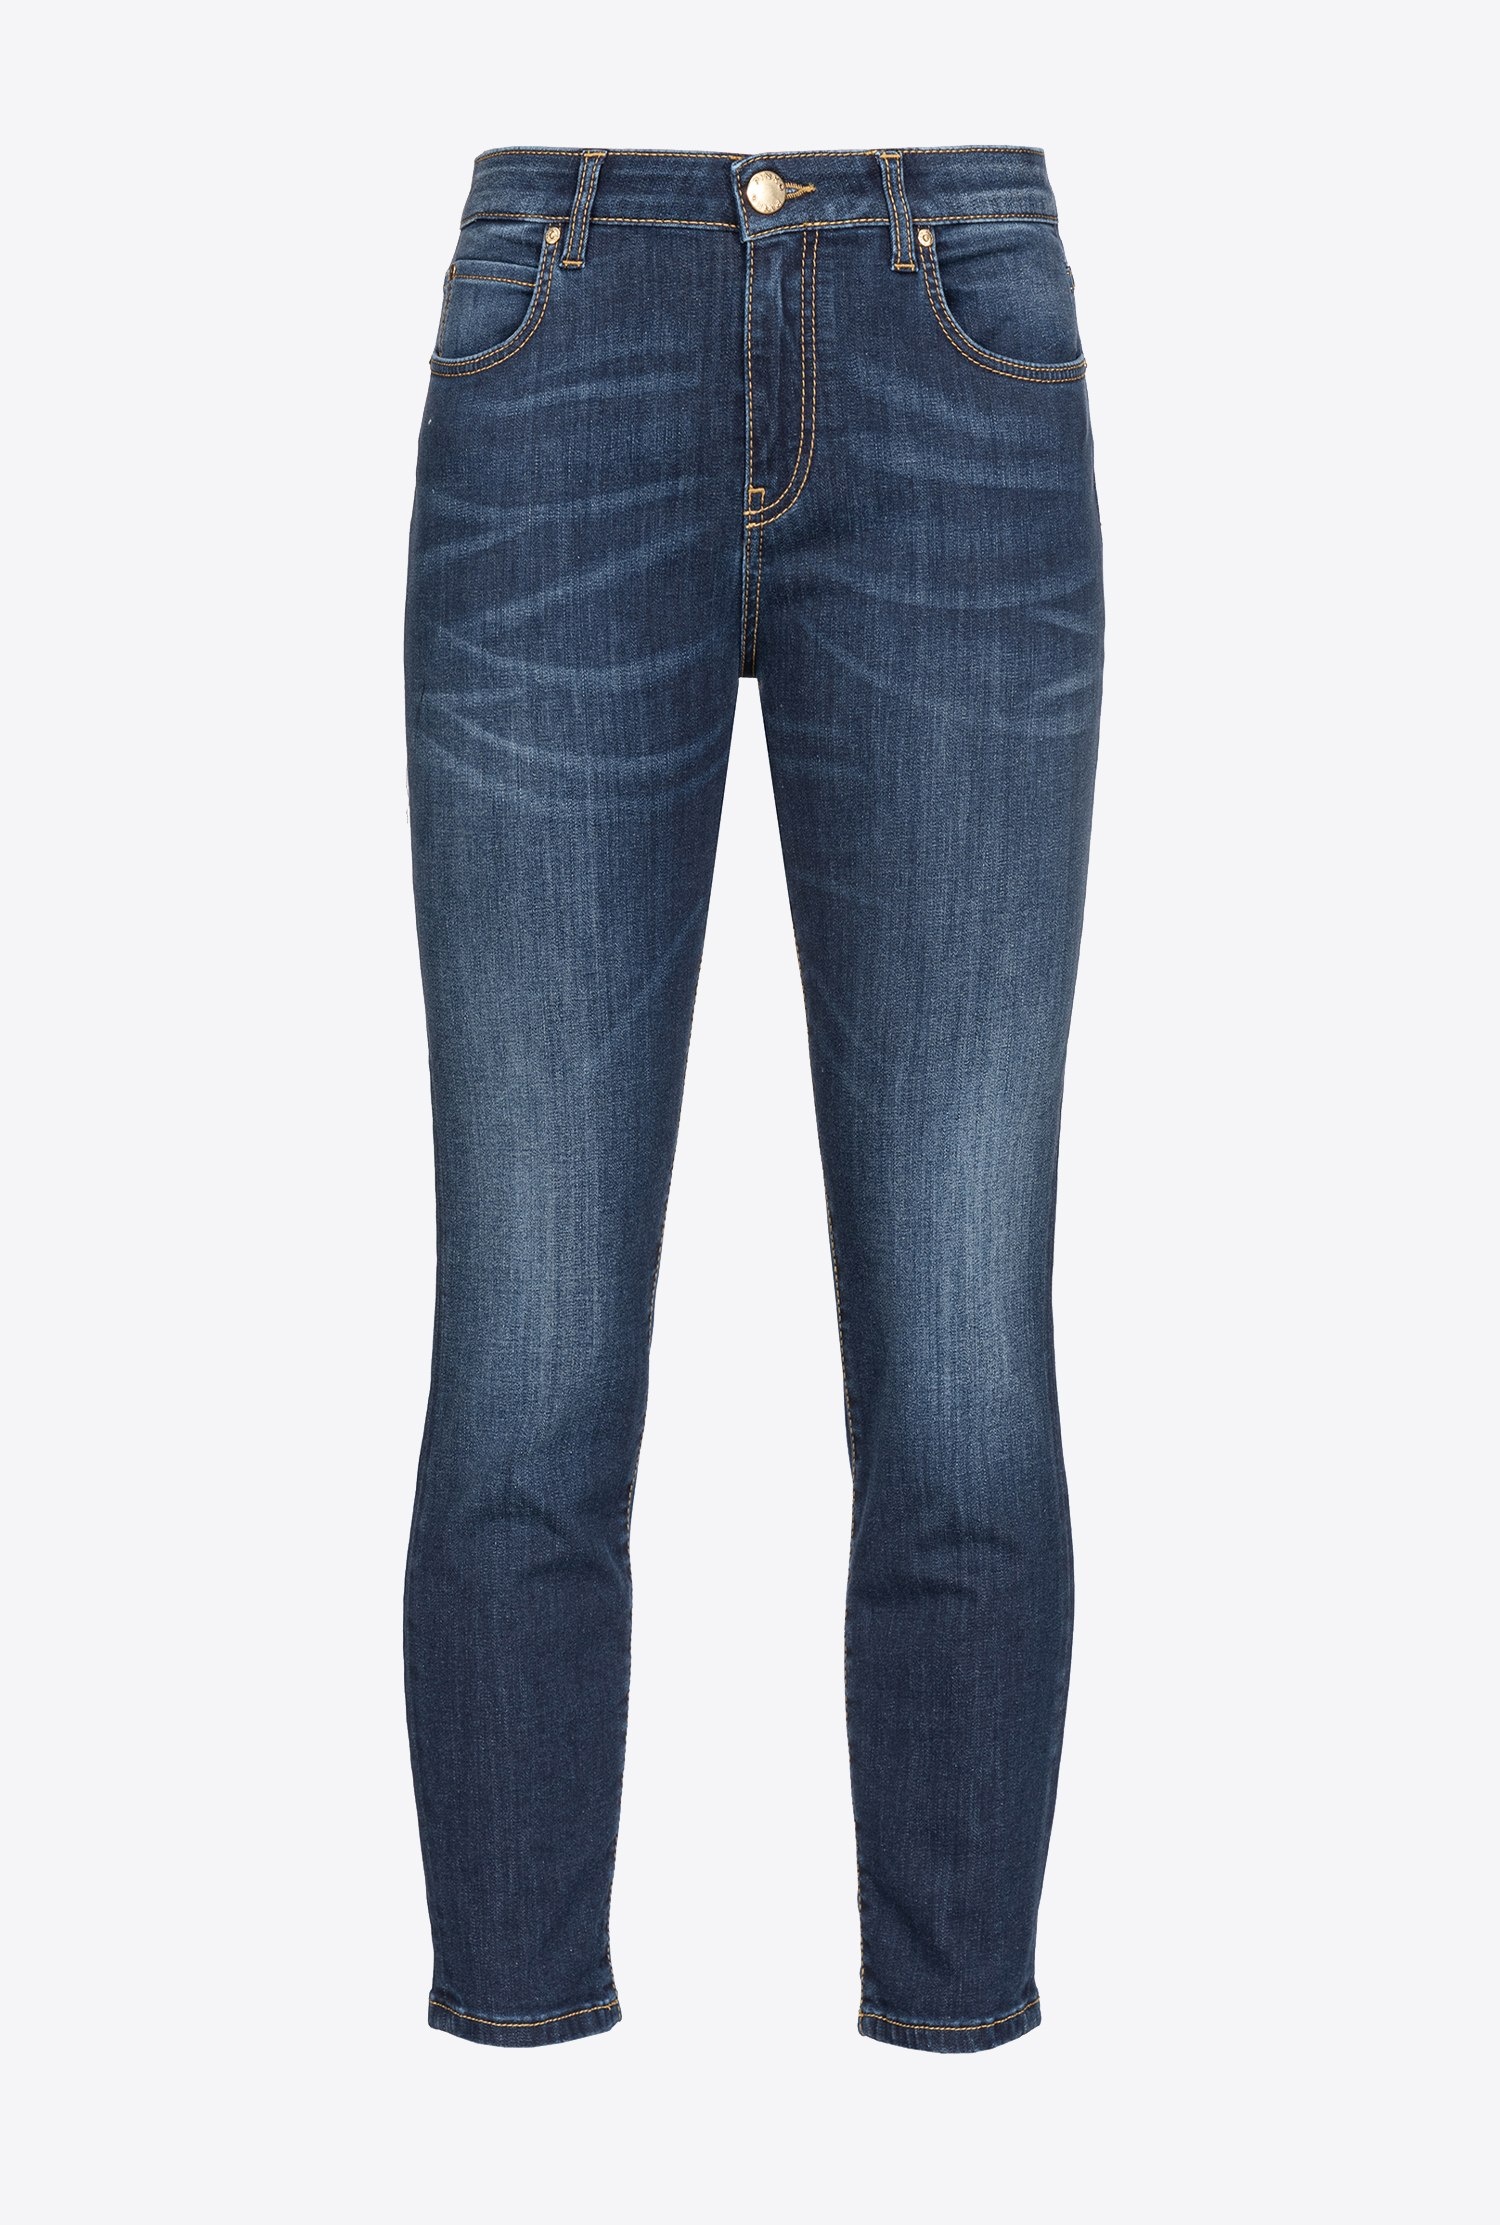 SKINNY STRETCH DENIM JEANS WITH EMBROIDERY ON THE BACK - 1